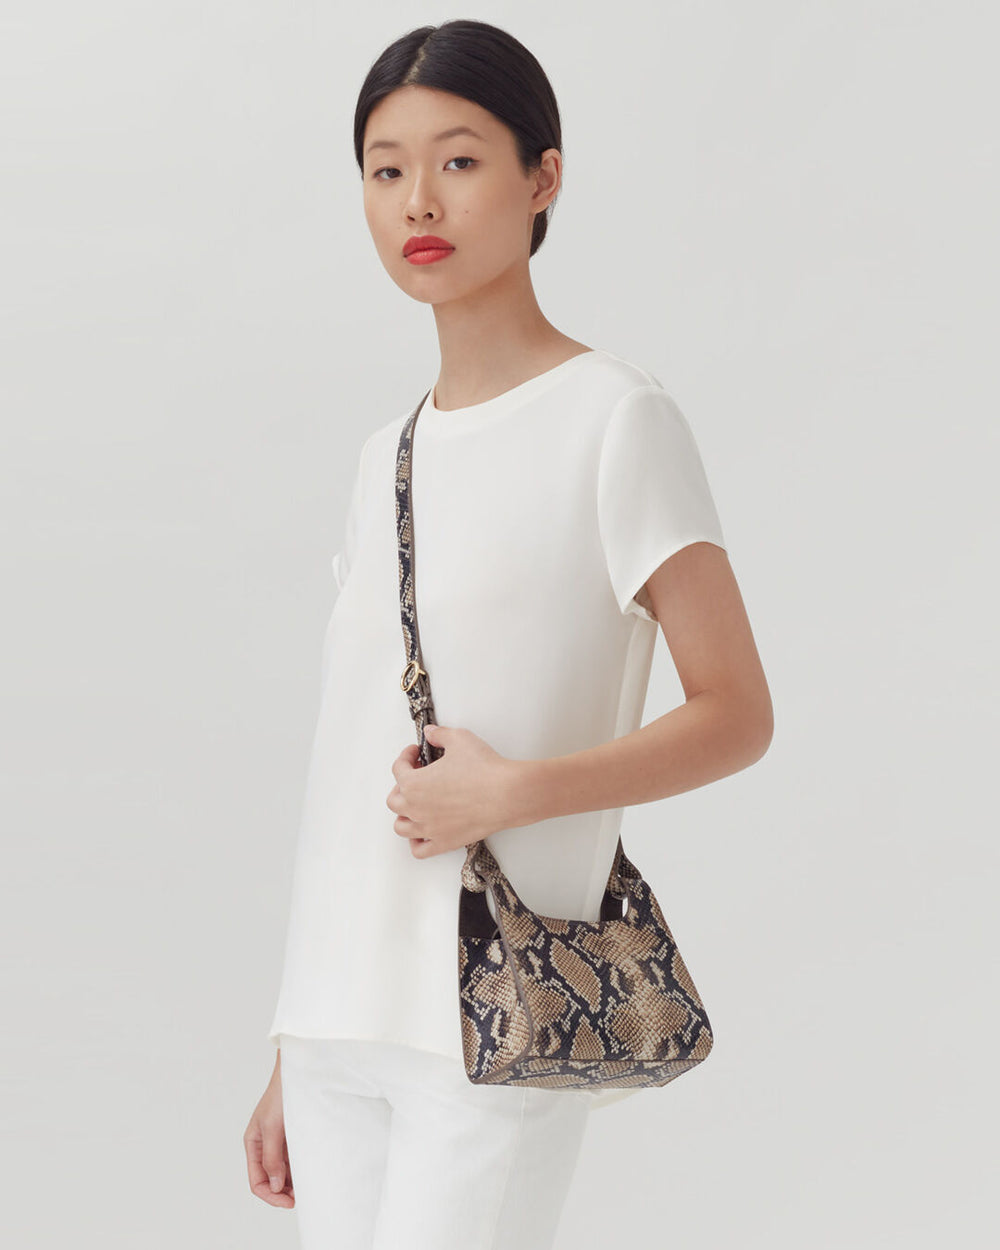 Woman standing with a crossbody bag, looking at the camera.